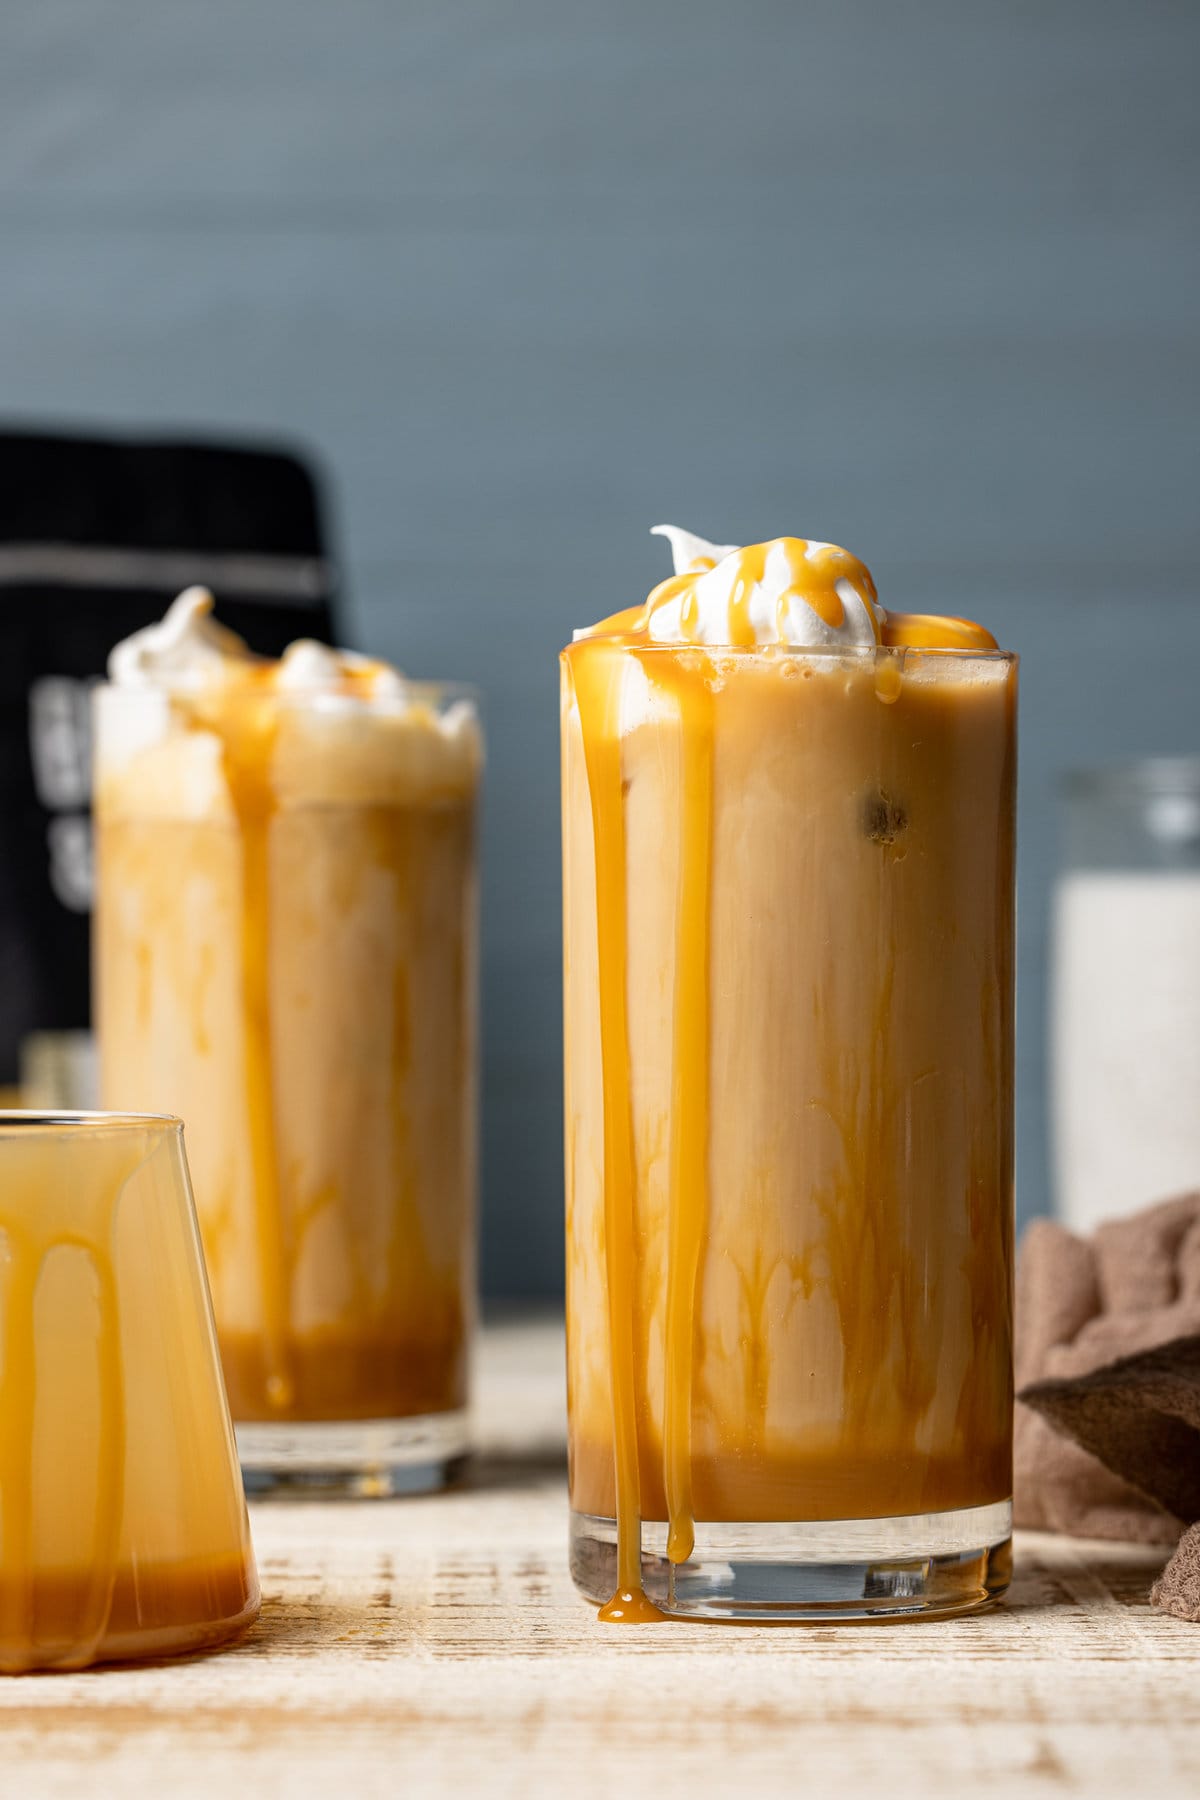 Iced Caramel Latte [with Coffee Ice Cubes]